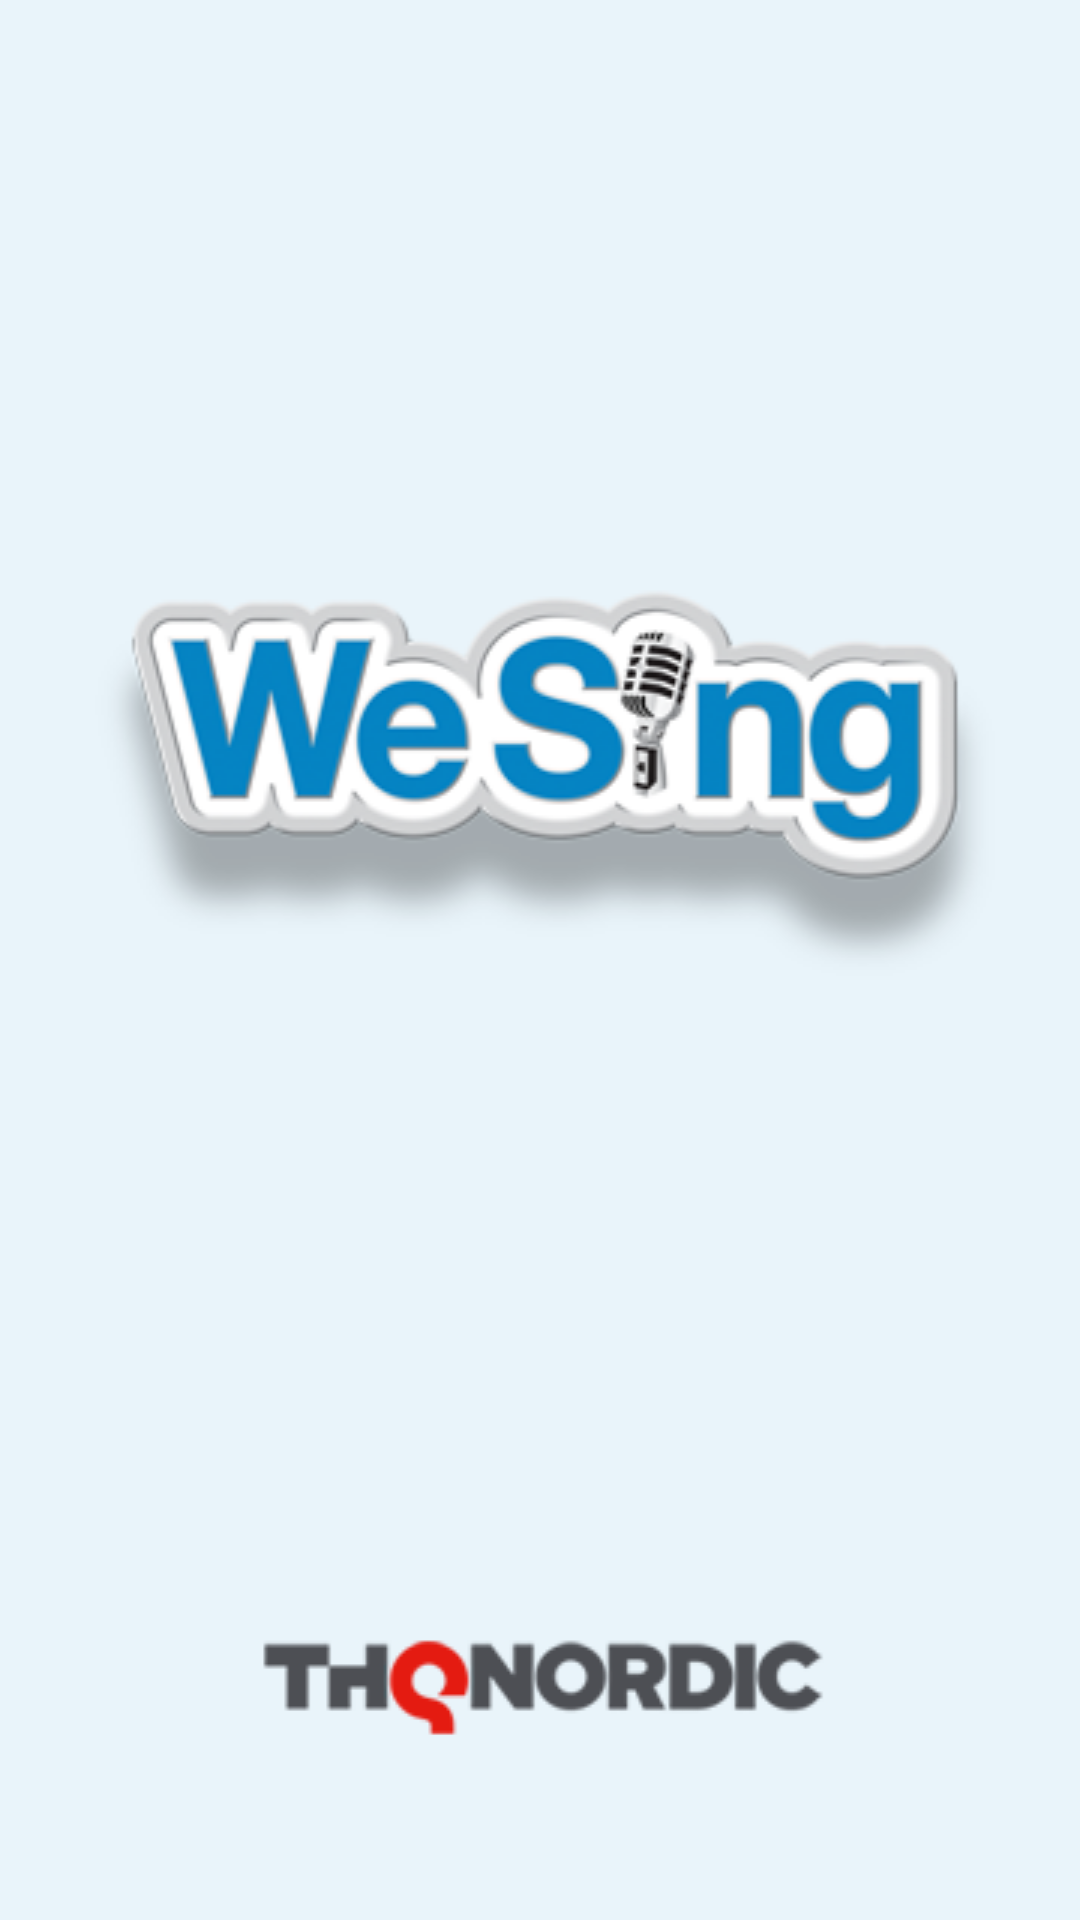 We Sing Mic APK 1.1.0 for Android – Download We Sing Mic XAPK (APK + OBB  Data) Latest Version from APKFab.com